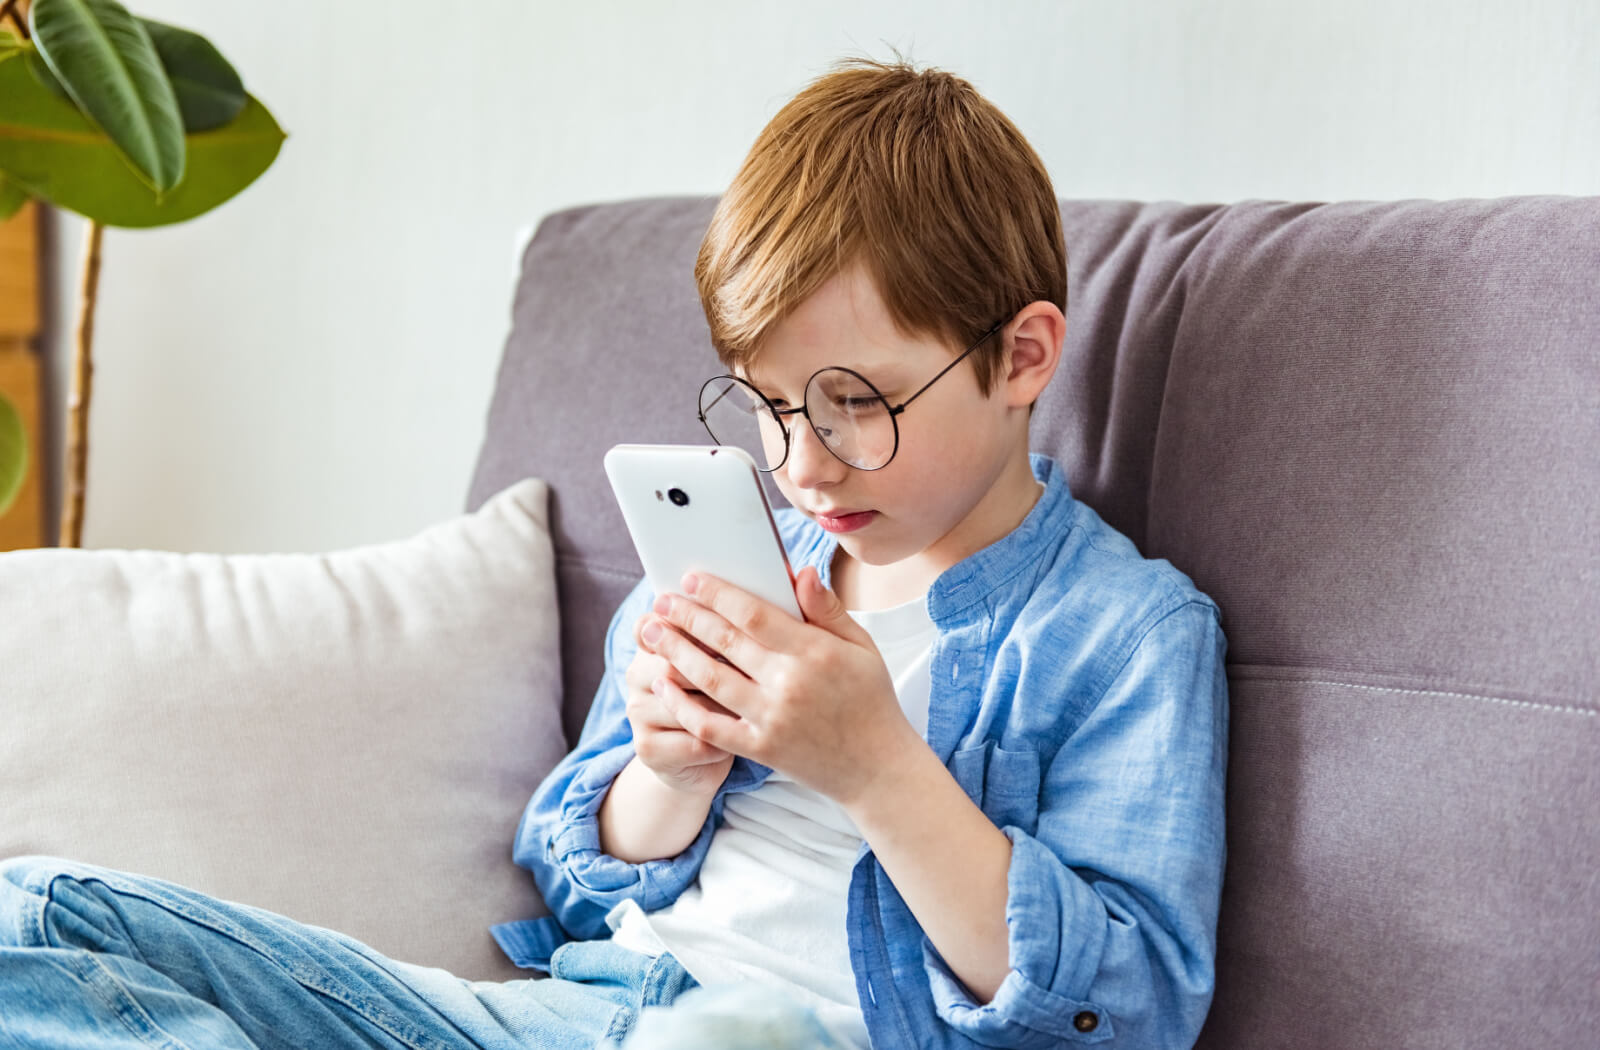 A small boy in glasses holding his smartphone close to his face to view the screen